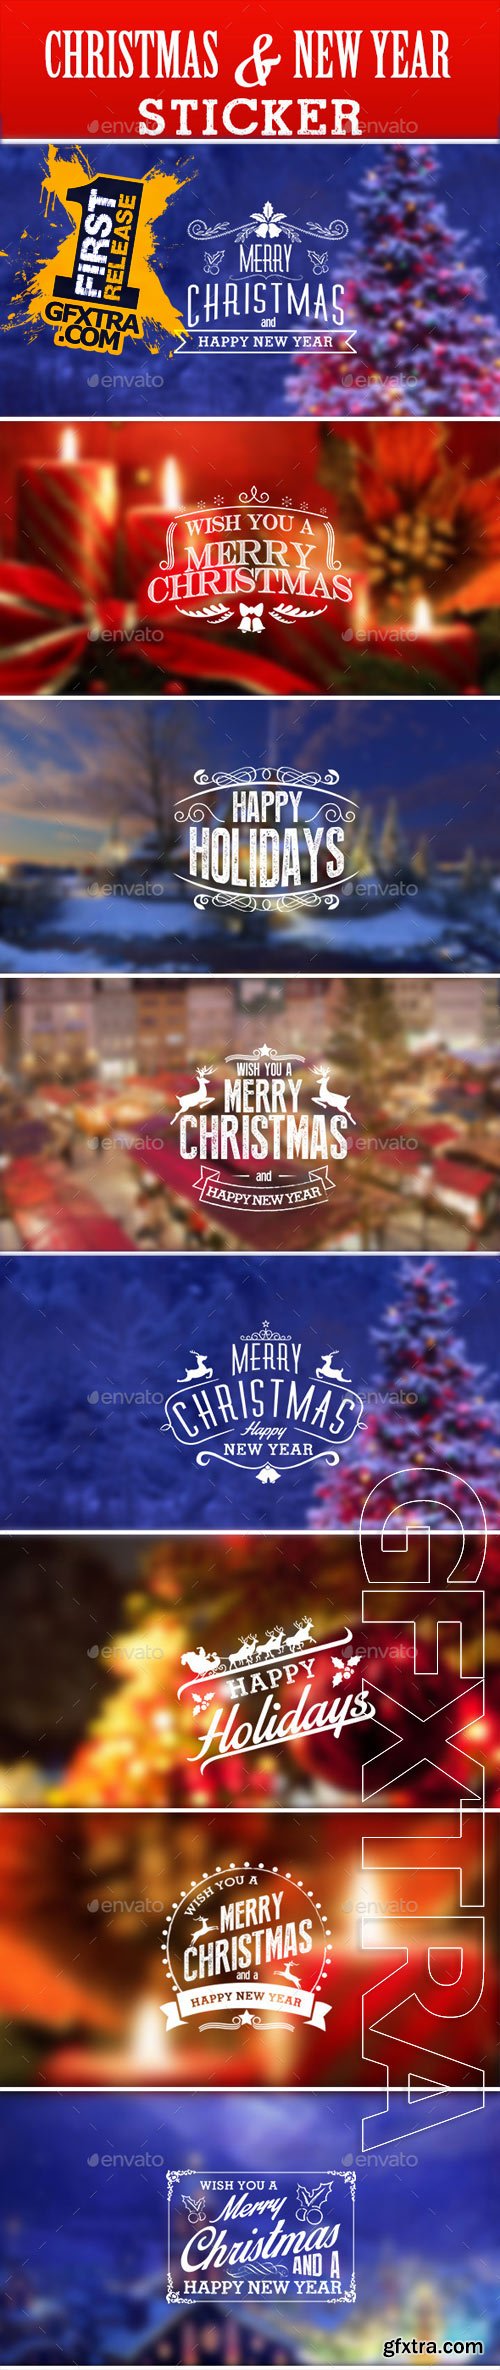 GraphicRiver - Christmas & New Year Sticker